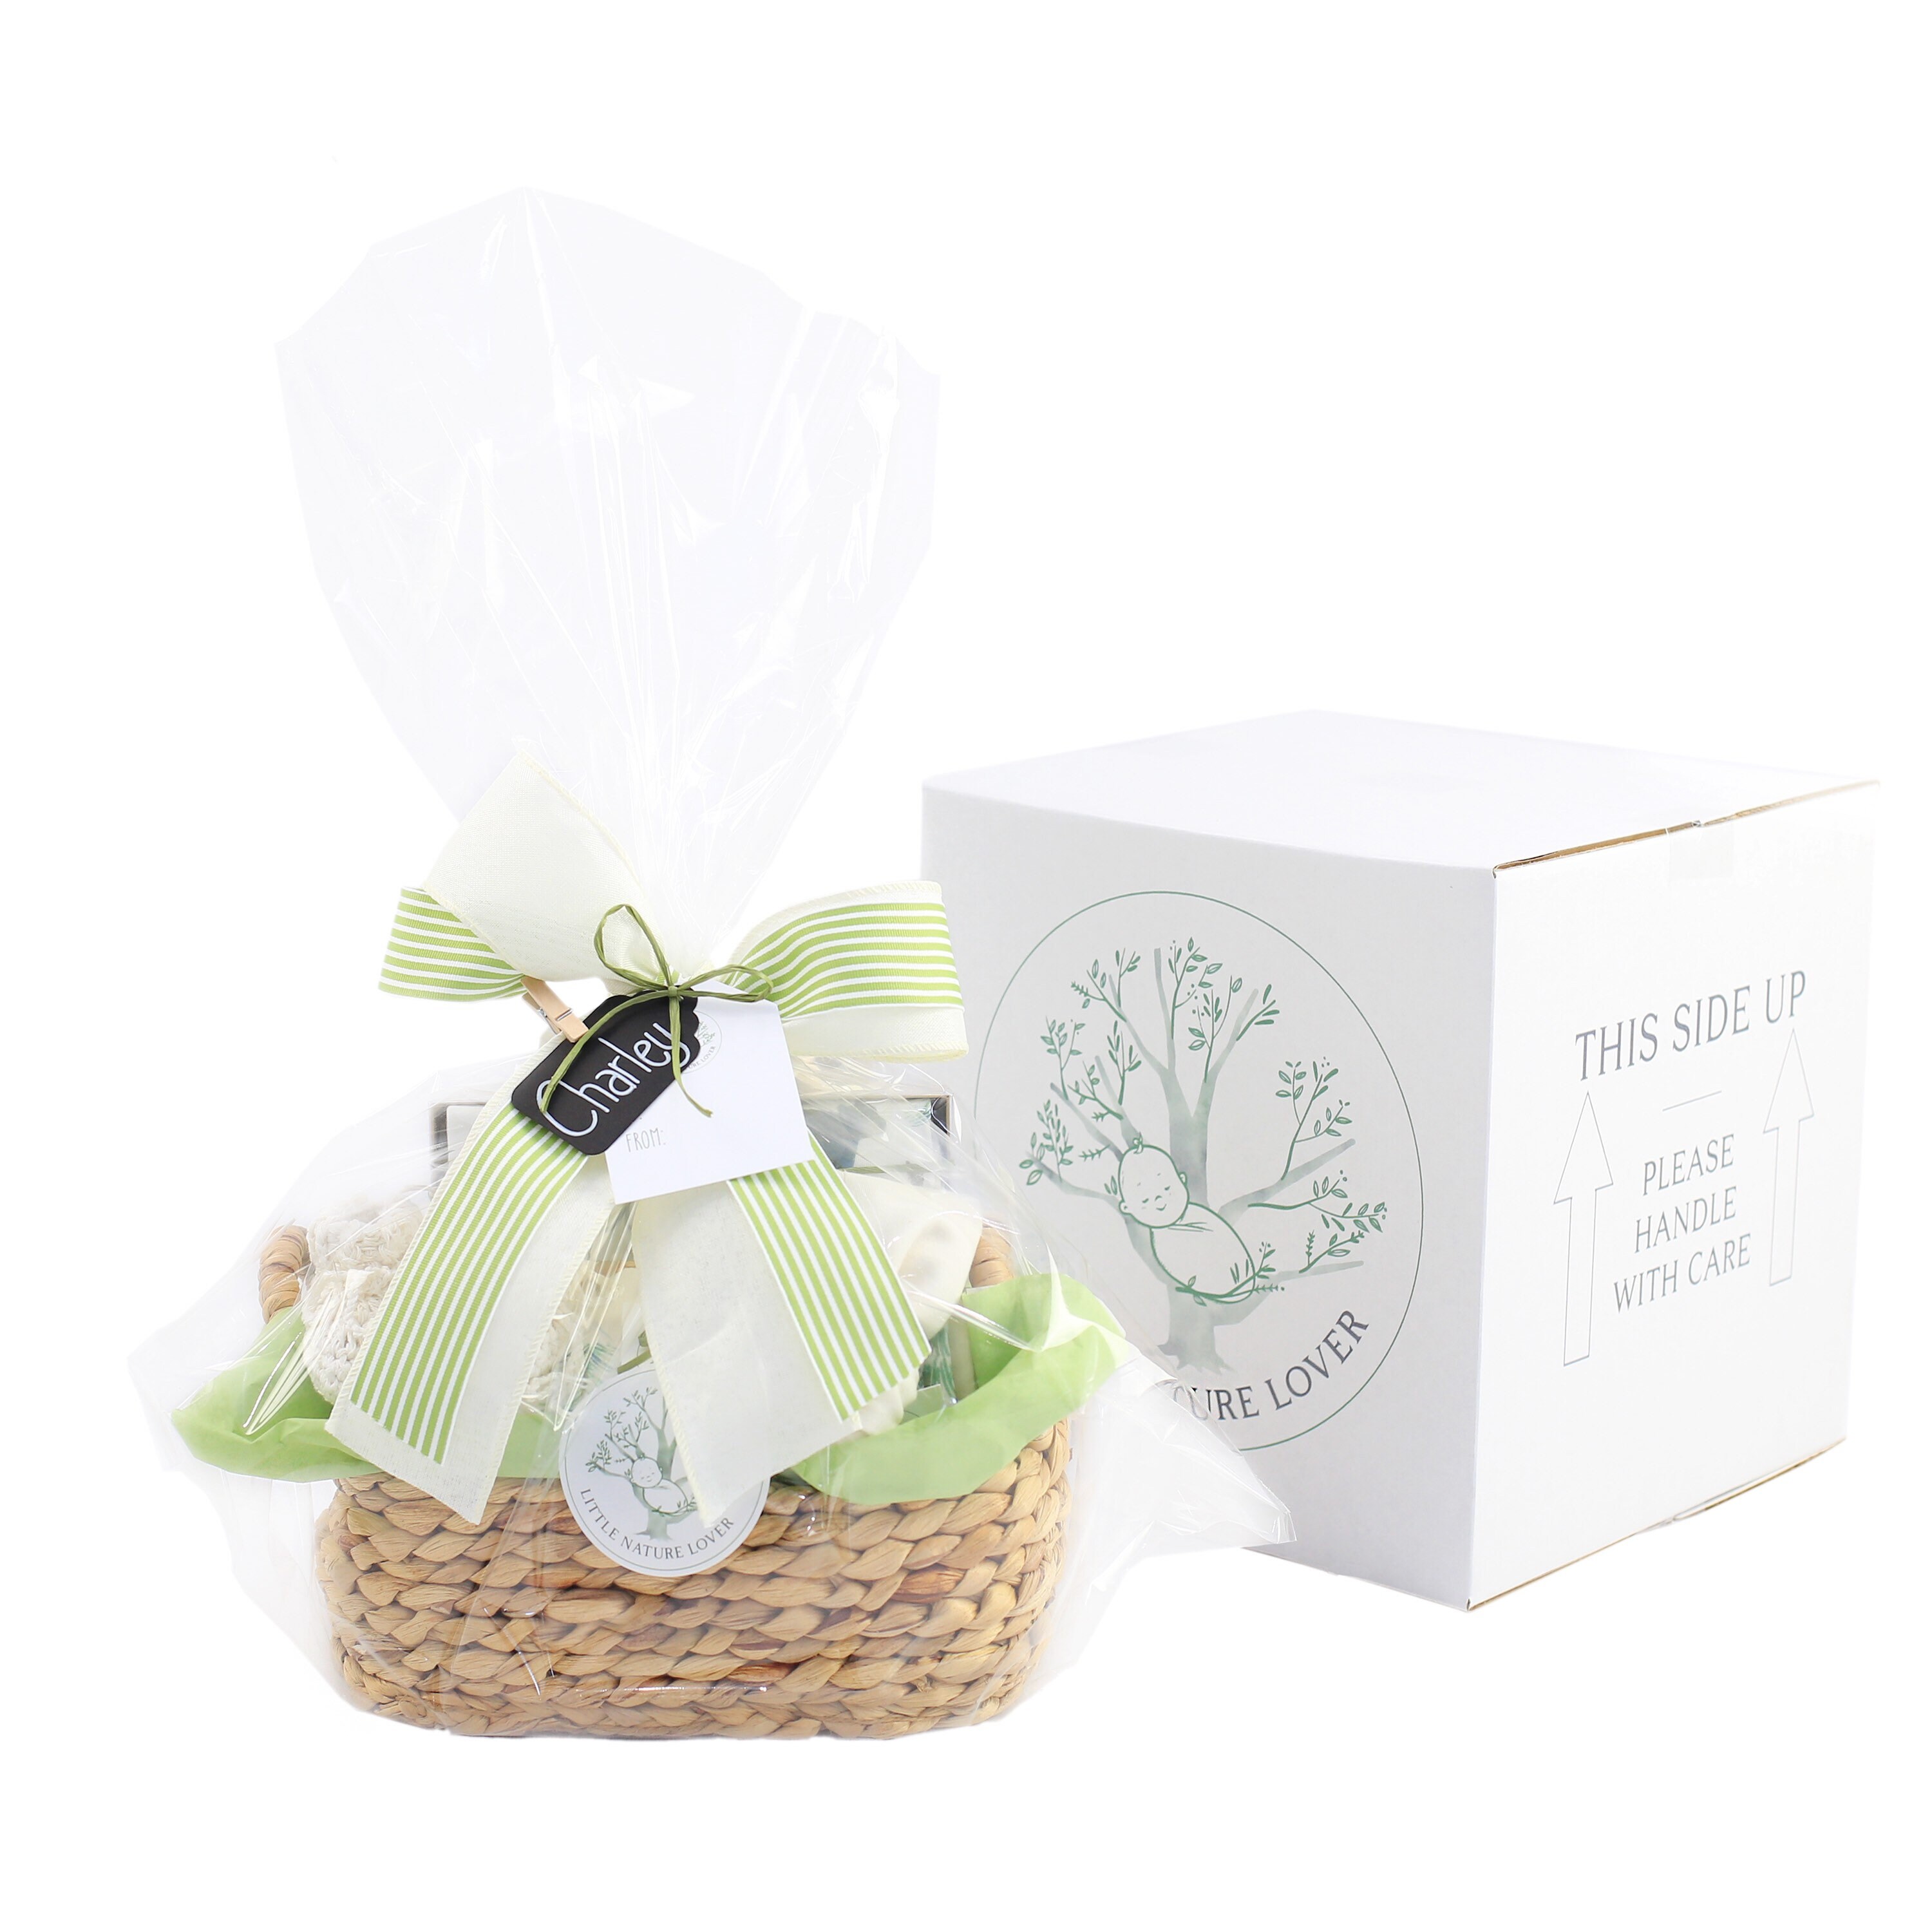 Gift Basket for Mom & Baby - Mommy & Me - Blue, Organic, & Eco-Friendly - for Both Mother and Newborn | Our Green House